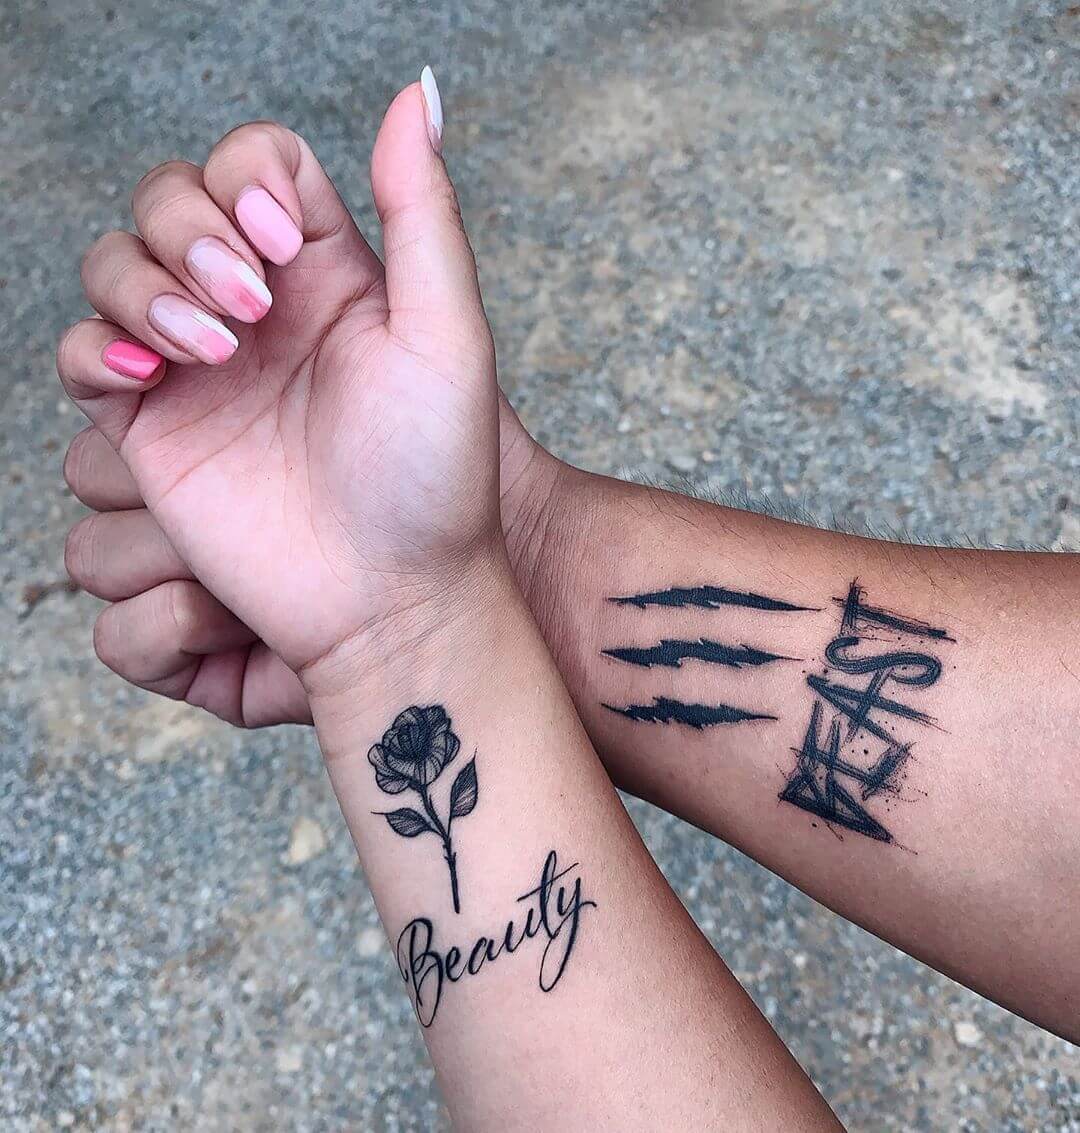 Aggregate 51+ unique tattoos for couples super hot - in.cdgdbentre-kimdongho.edu.vn